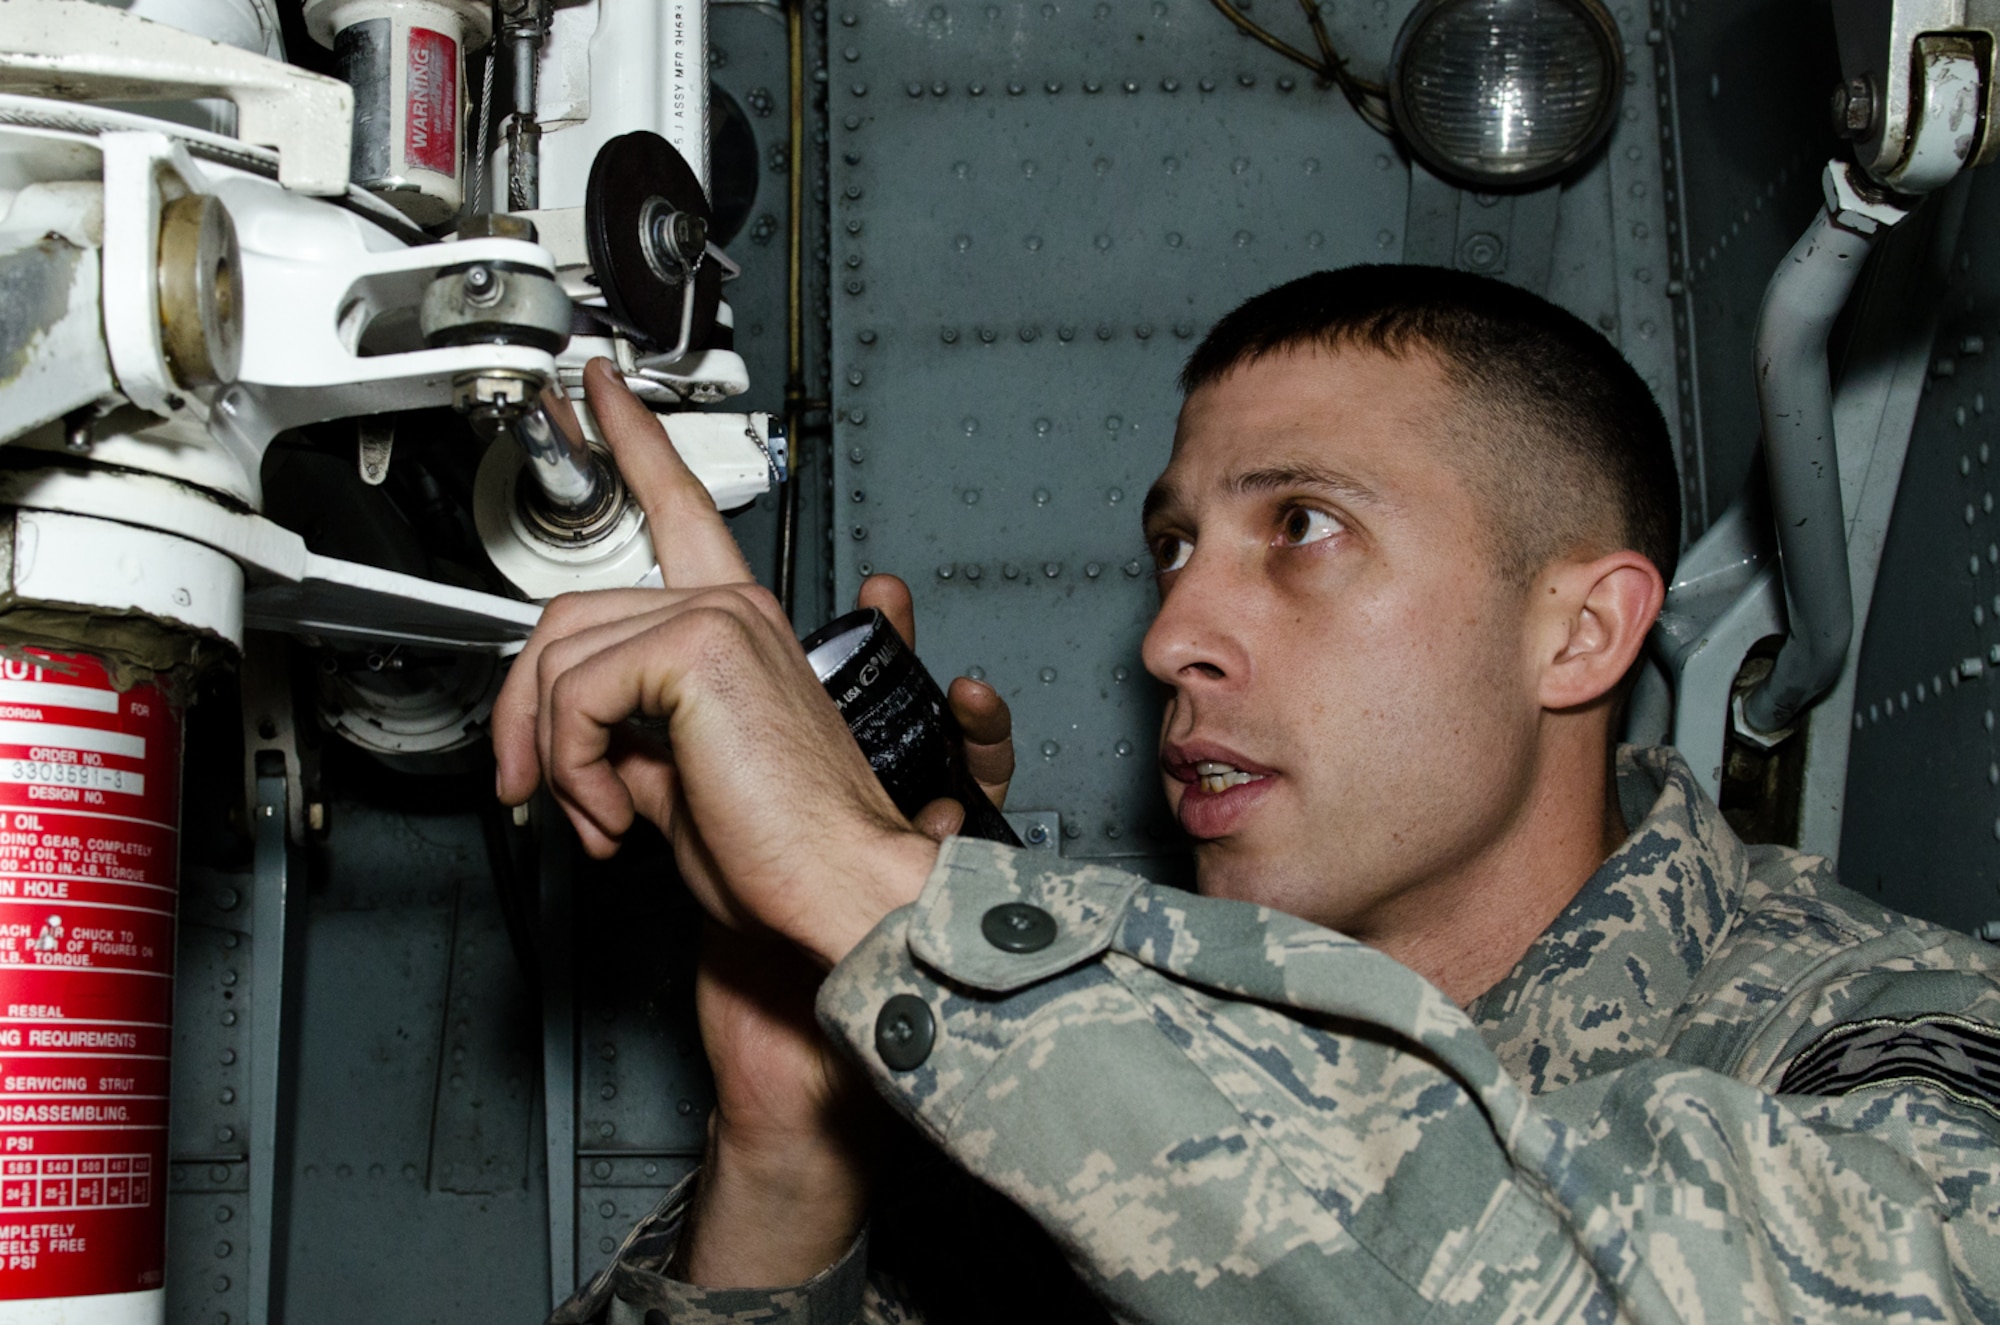 Tech. Sgt. Fred Pierce, 139th Aircraft Maintenance Squadron crew chief, points to the nose landing gear steering control valve of a C-130 Hercules aircraft at Rosecrans Air National Guard Base, St. Joseph, Mo., on Dec. 29, 2011. Pierce was selected as the Outstanding Noncommissioned Officer of the Year for the Missouri Air National Guard. (Missouri Air National Guard photo by Staff Sgt. Michael Crane)